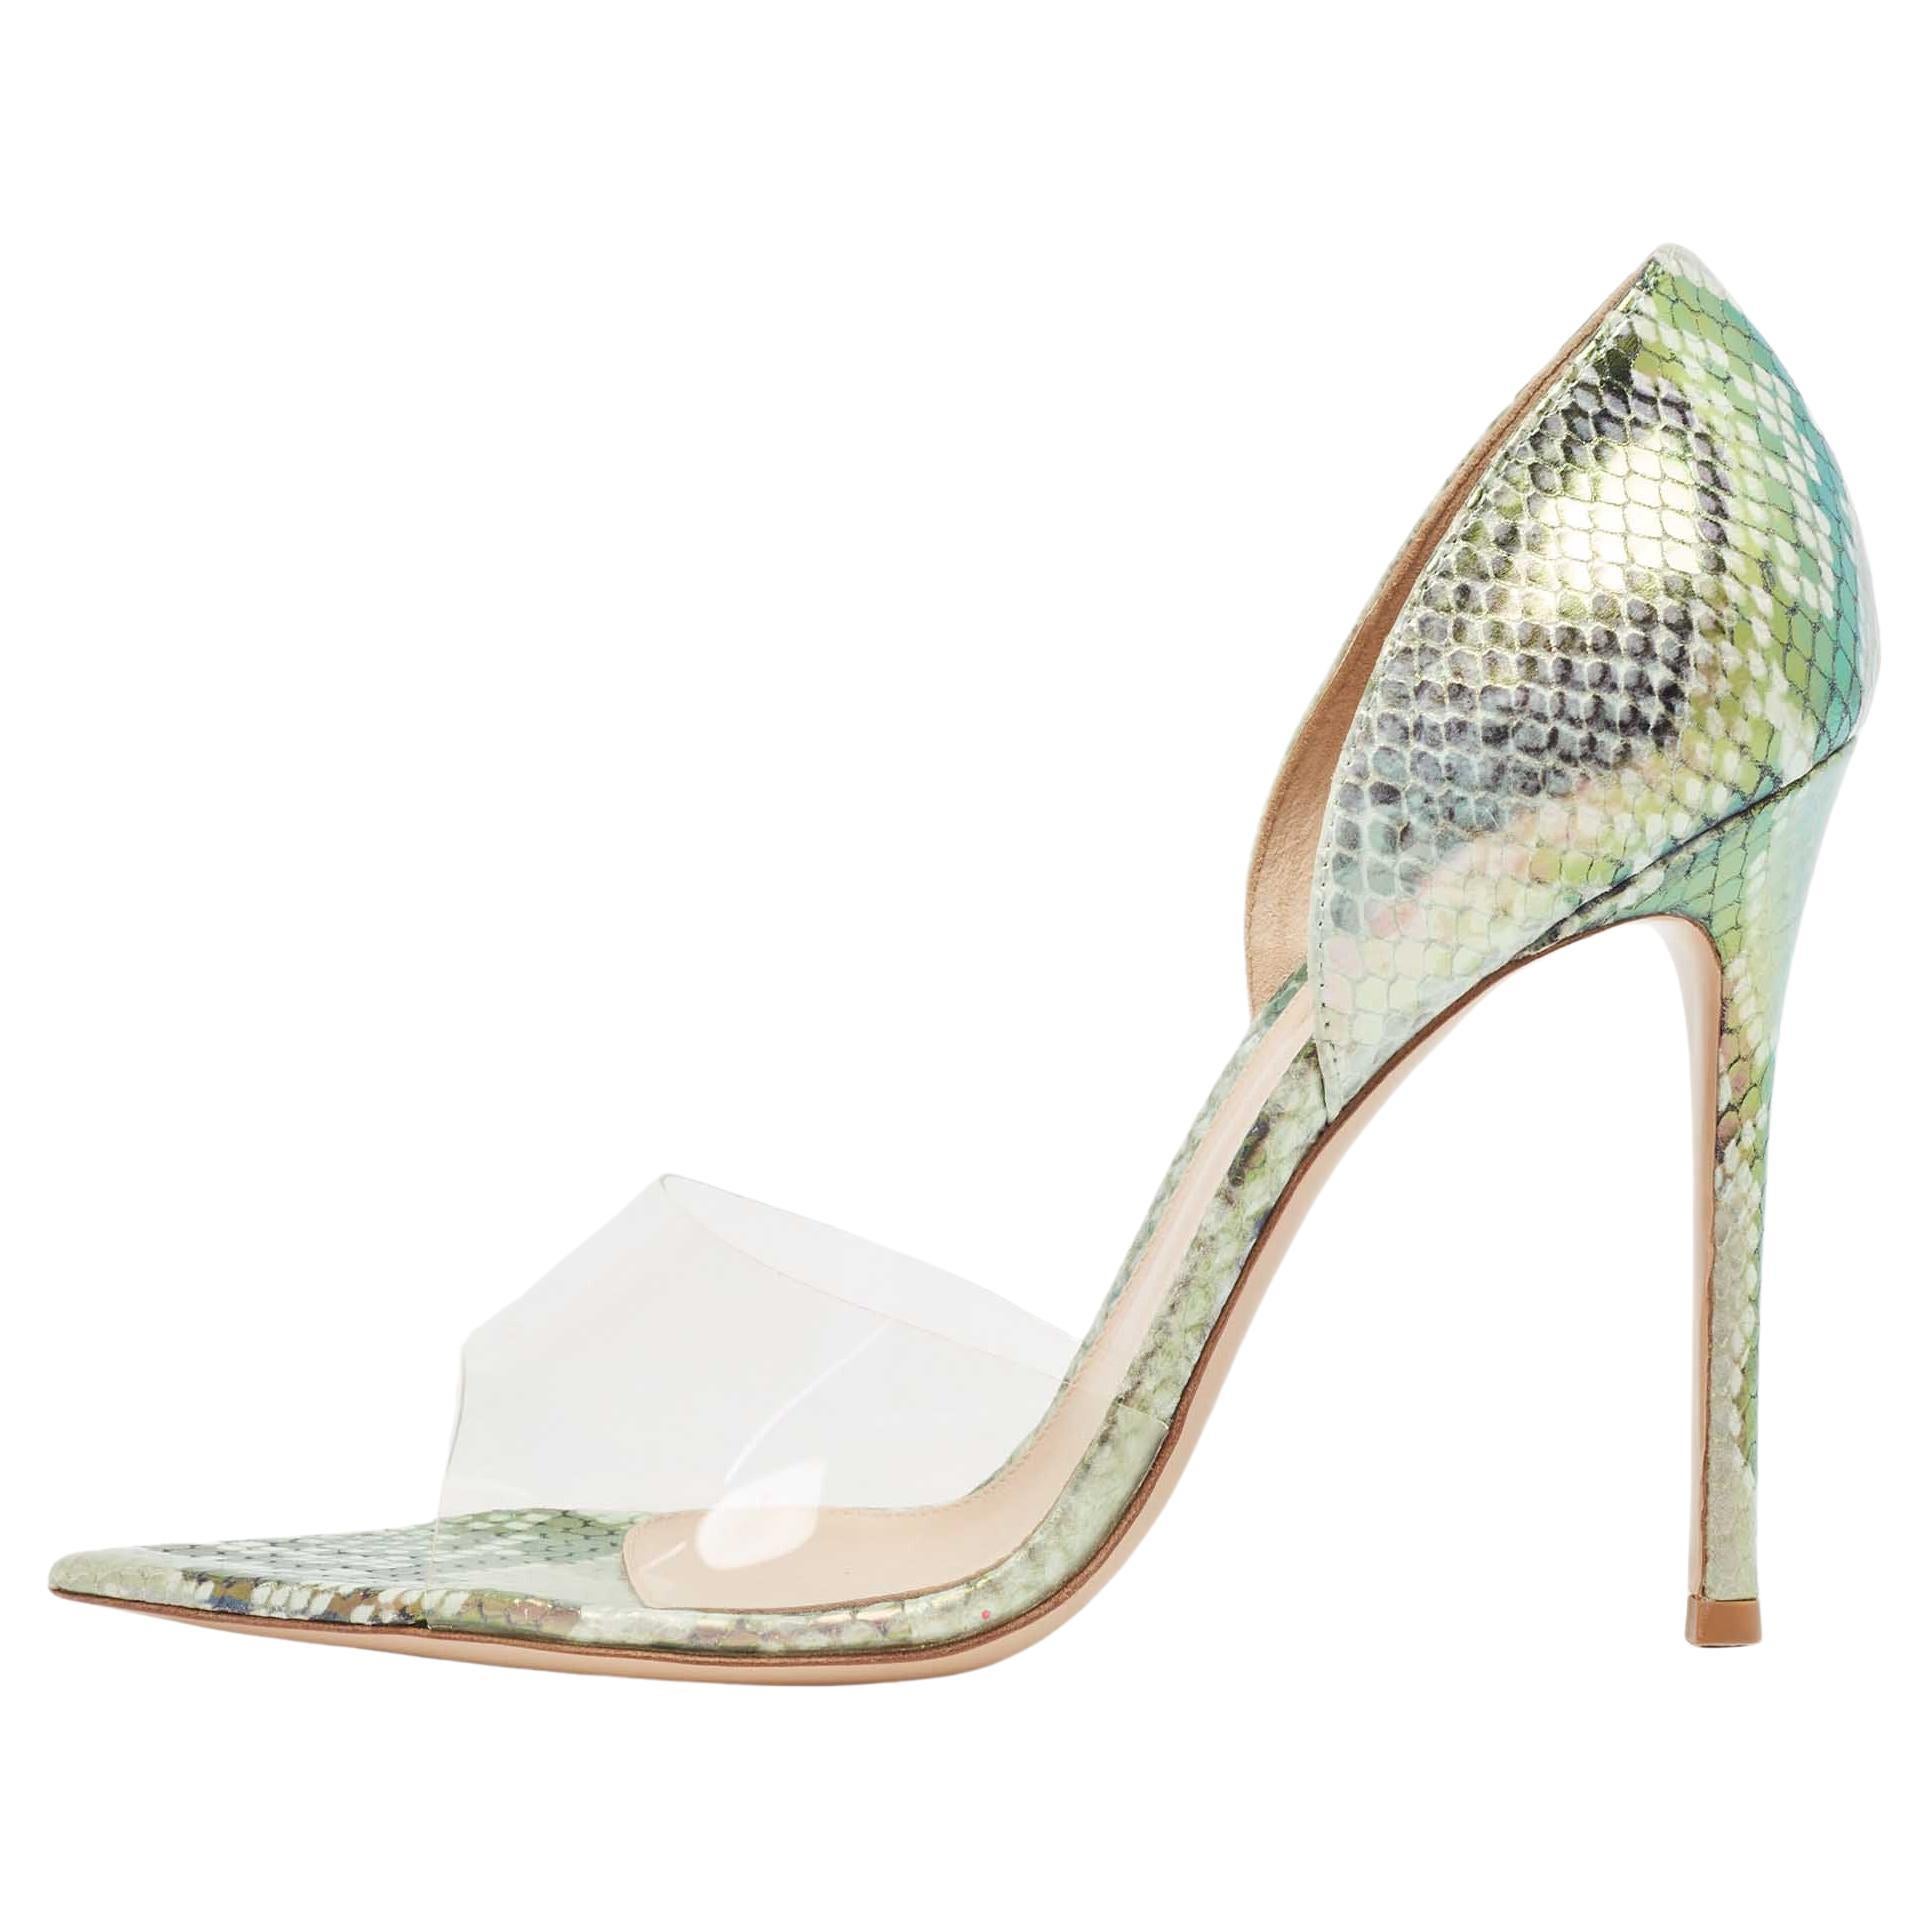 Gianvito Rossi Metallic Embossed Snakeskin and PVC Bree Pumps Size 40.5 For Sale